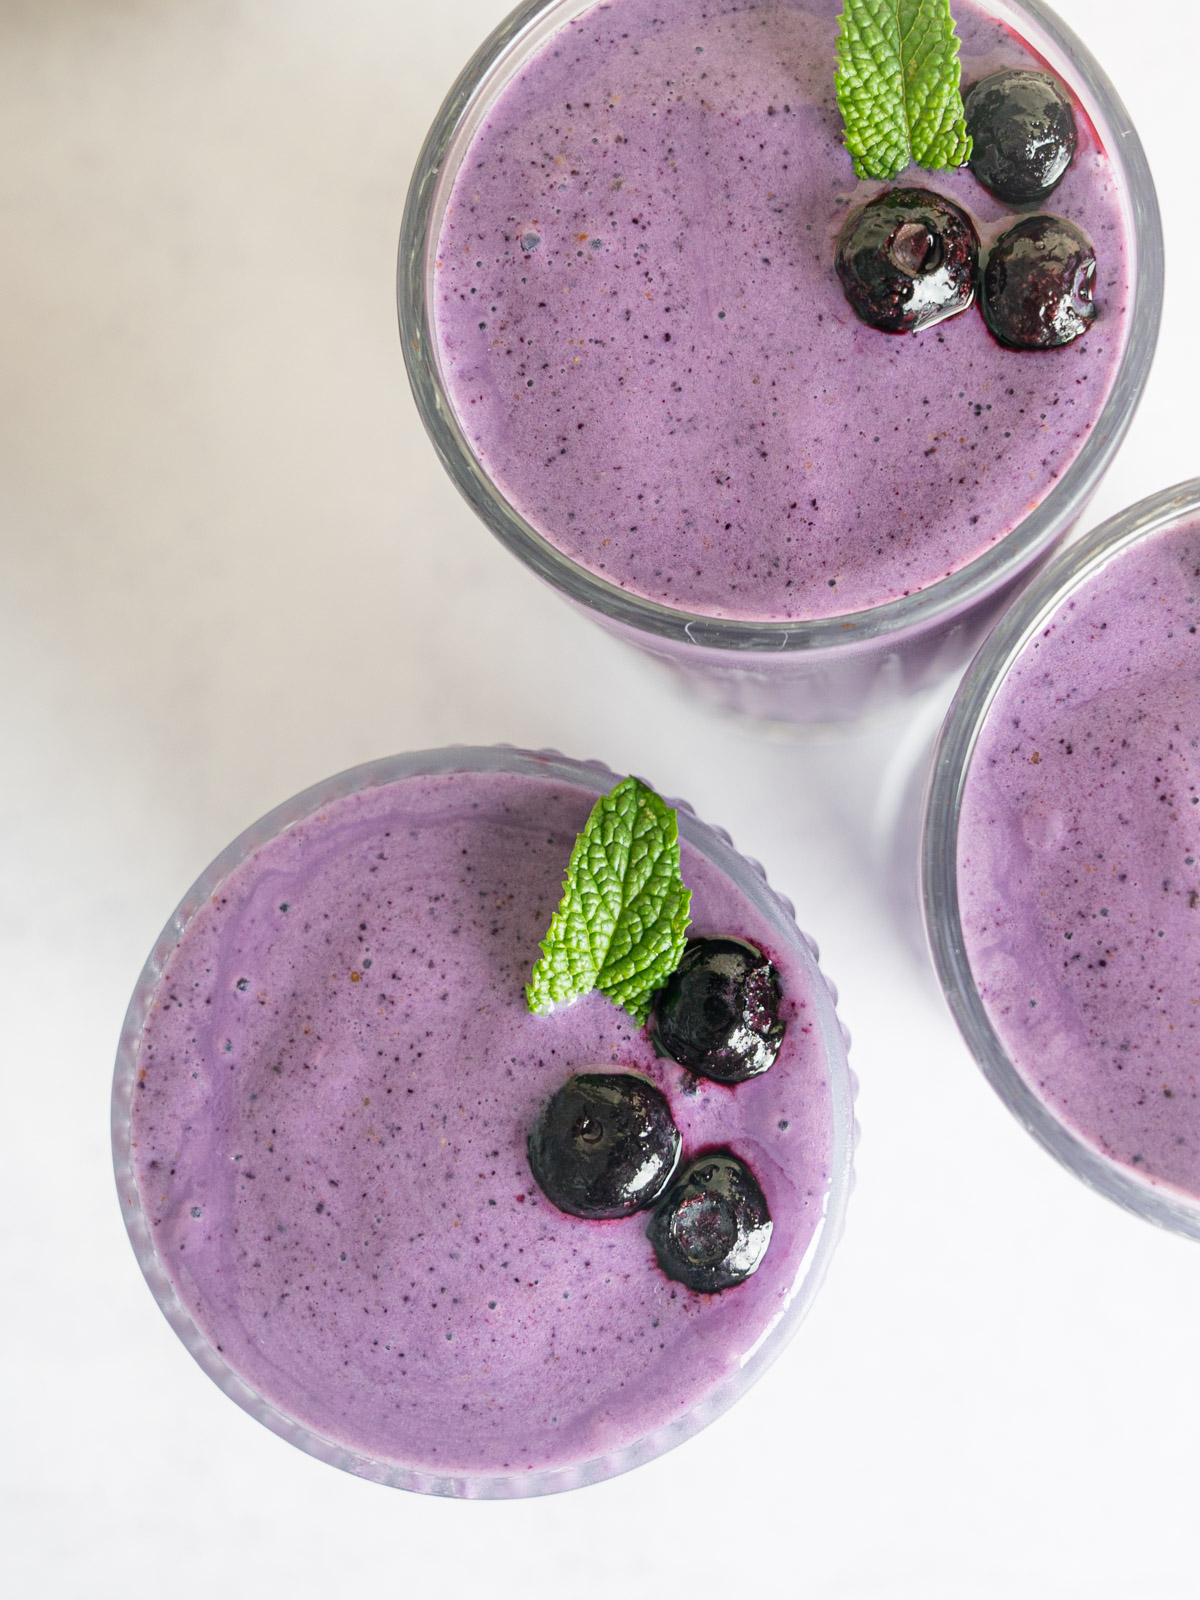 Top down of the Berry Bliss Smoothie. Three glasses with garnish over top. The garnish includes three blueberries and a mint leaf.